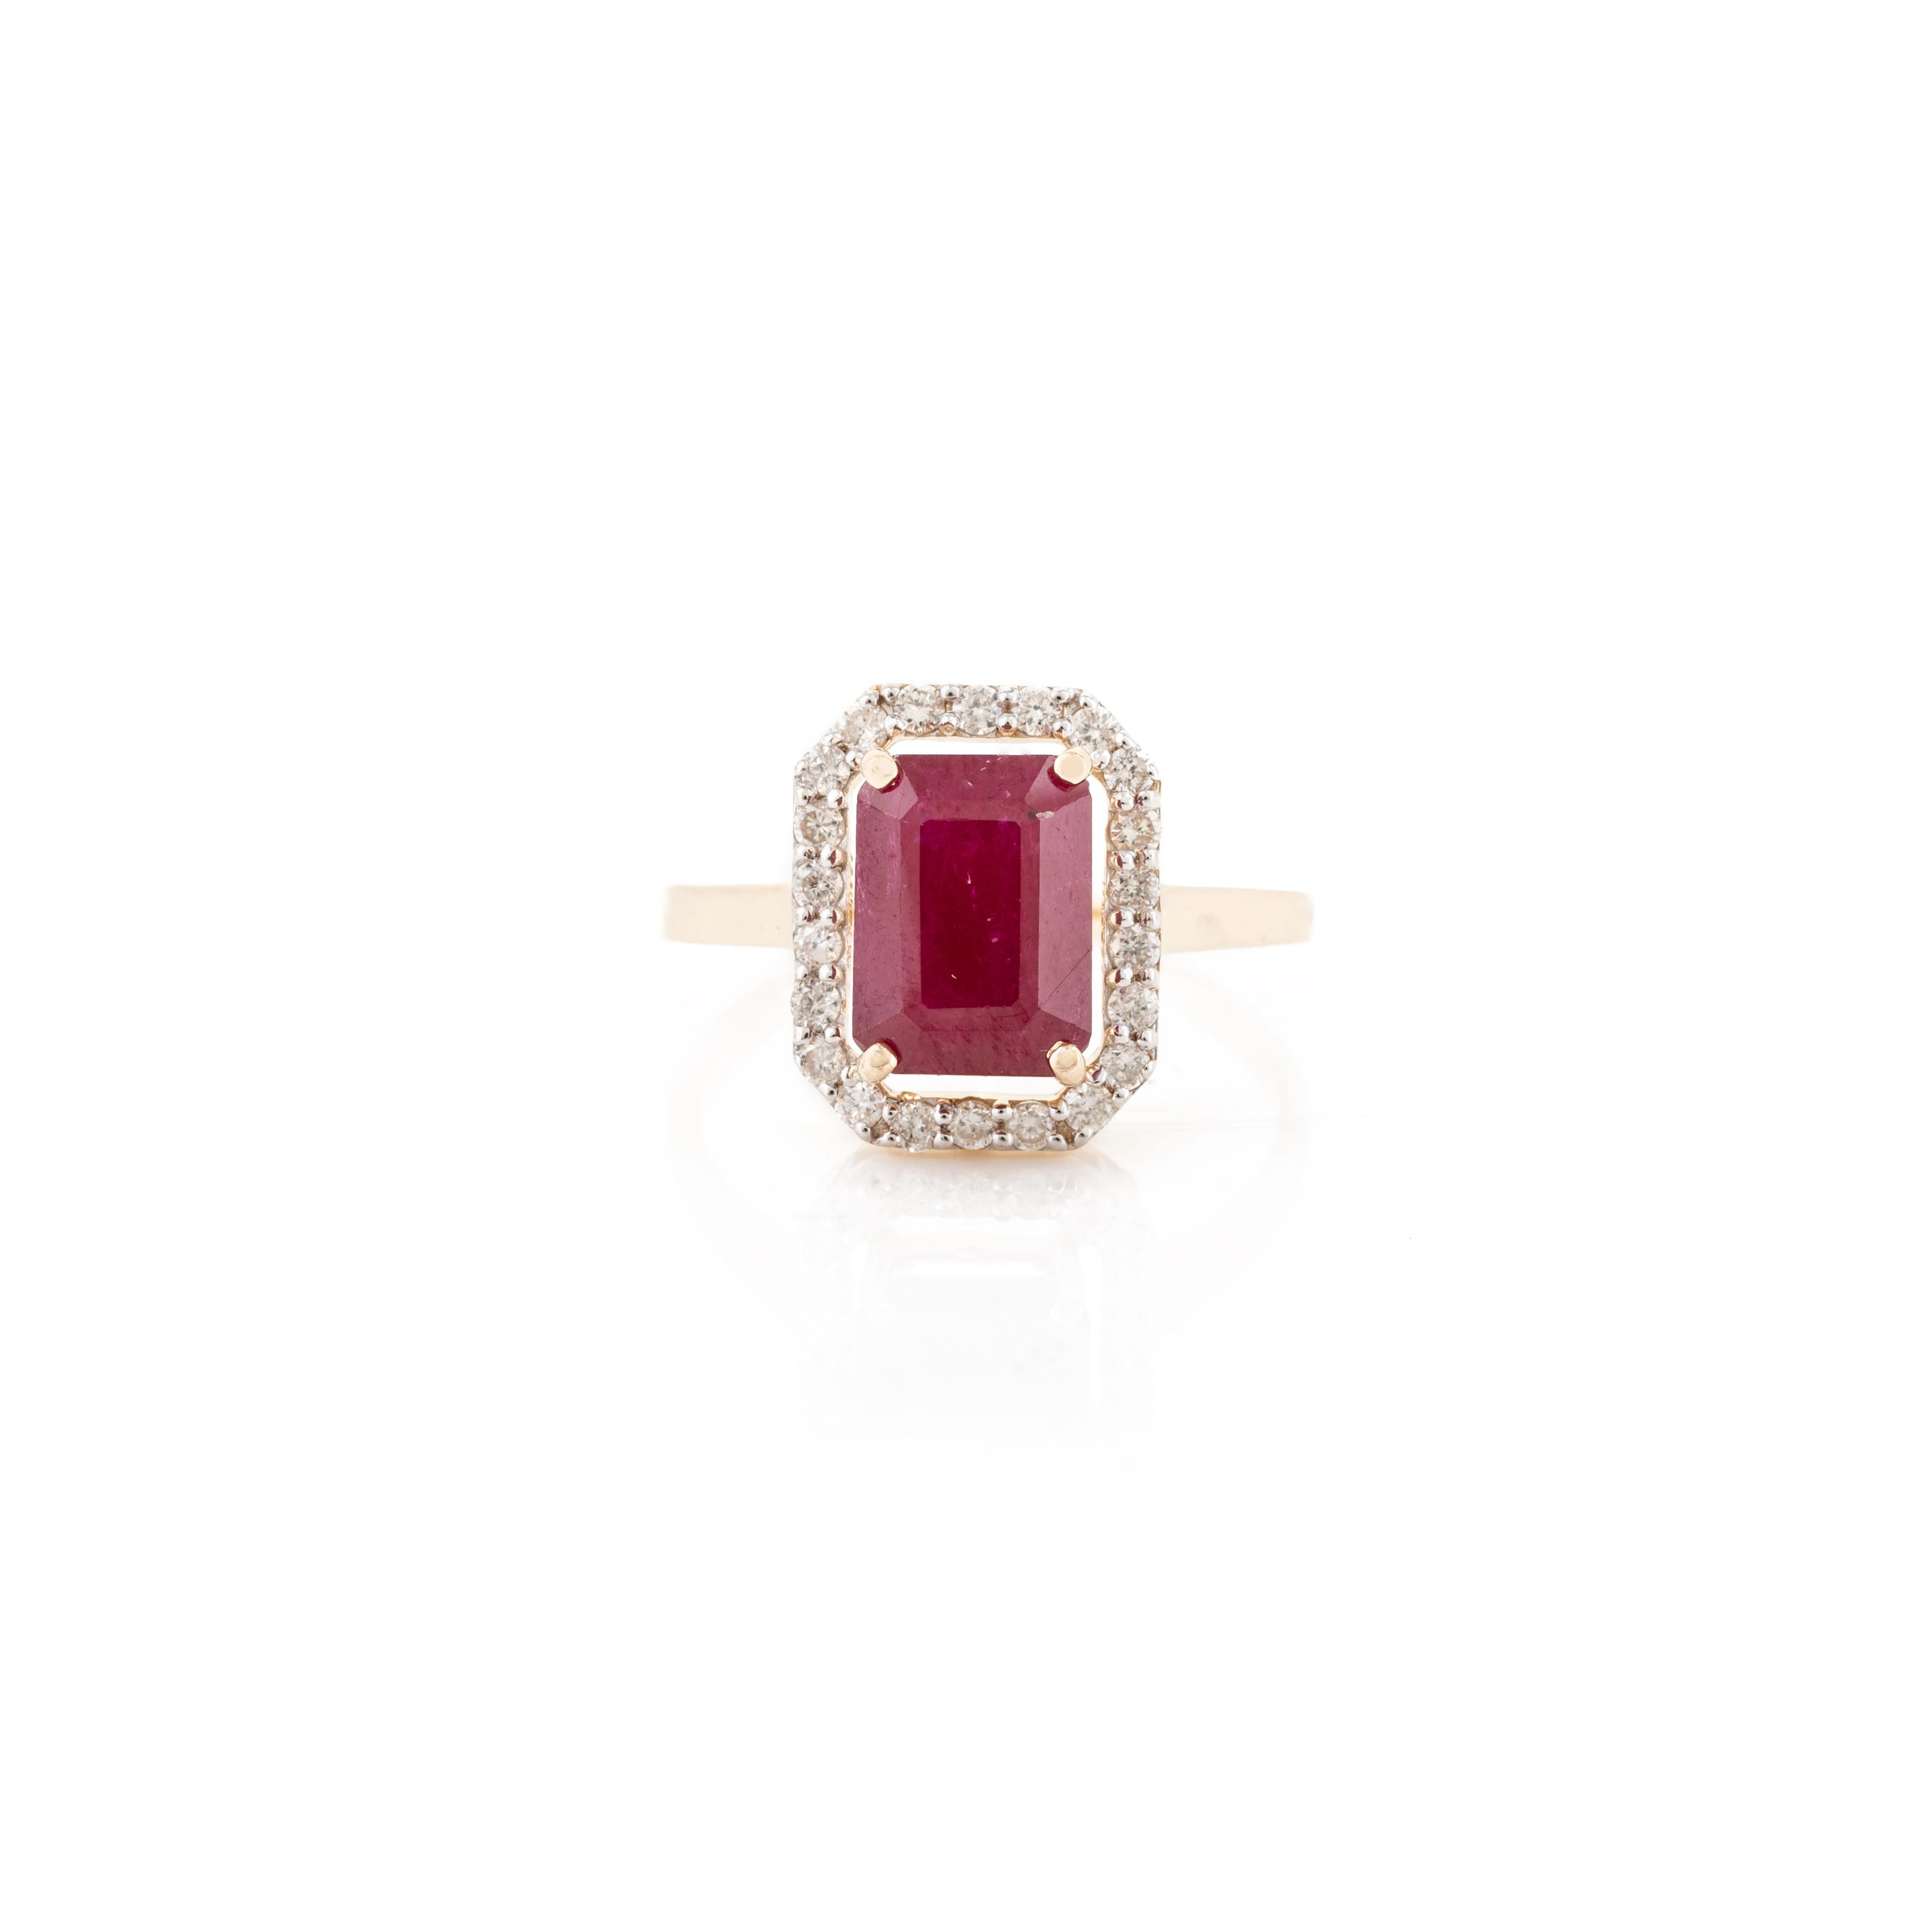 For Sale:  2.95 Carat Authentic Ruby Diamond Halo Engagement Ring in 18k Solid Yellow Gold 3